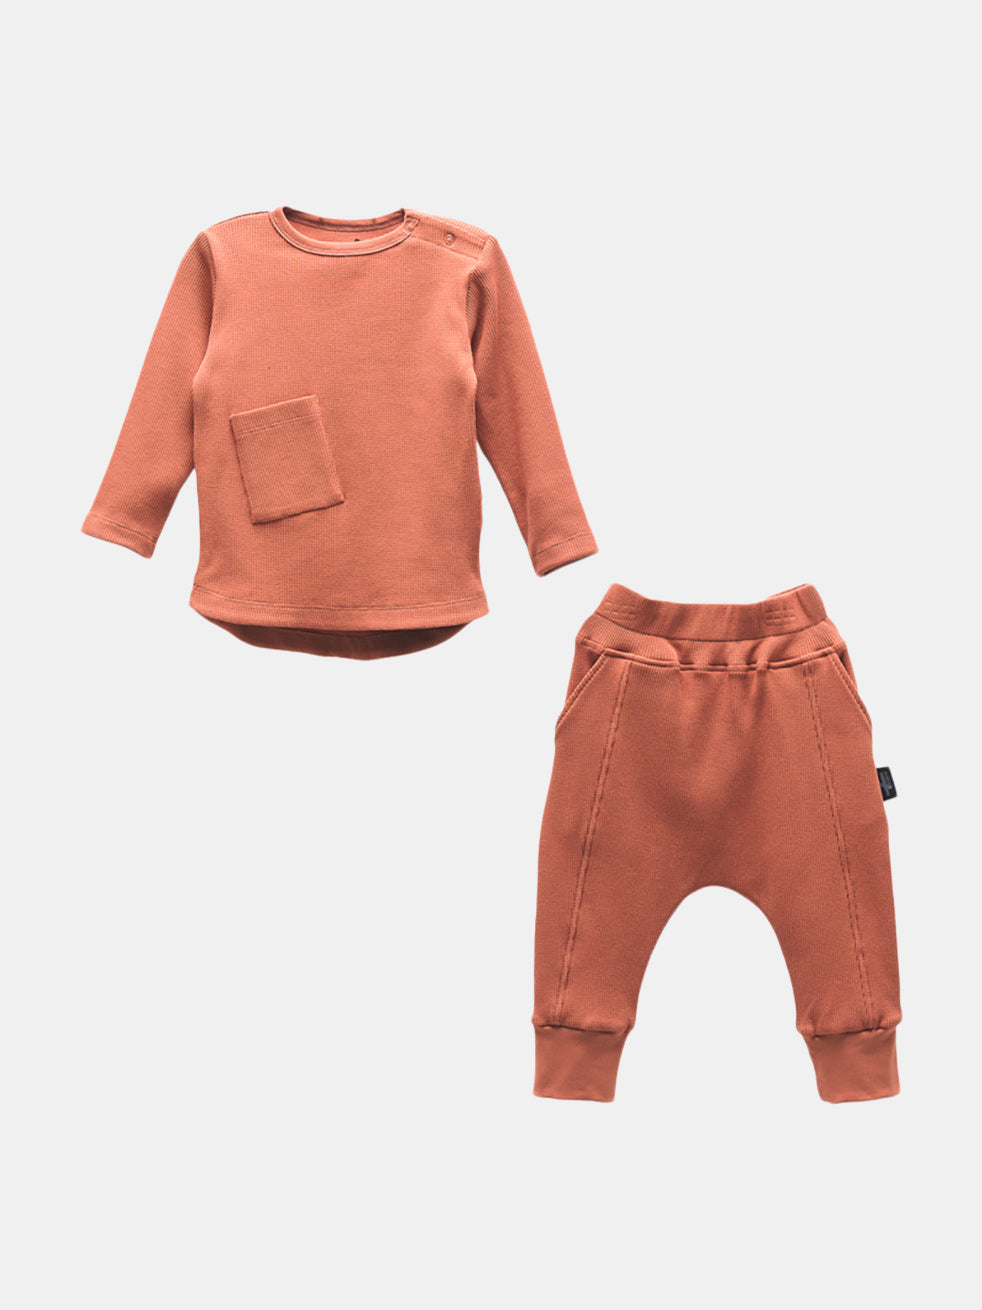 Terra Cotta Pouch Outfit